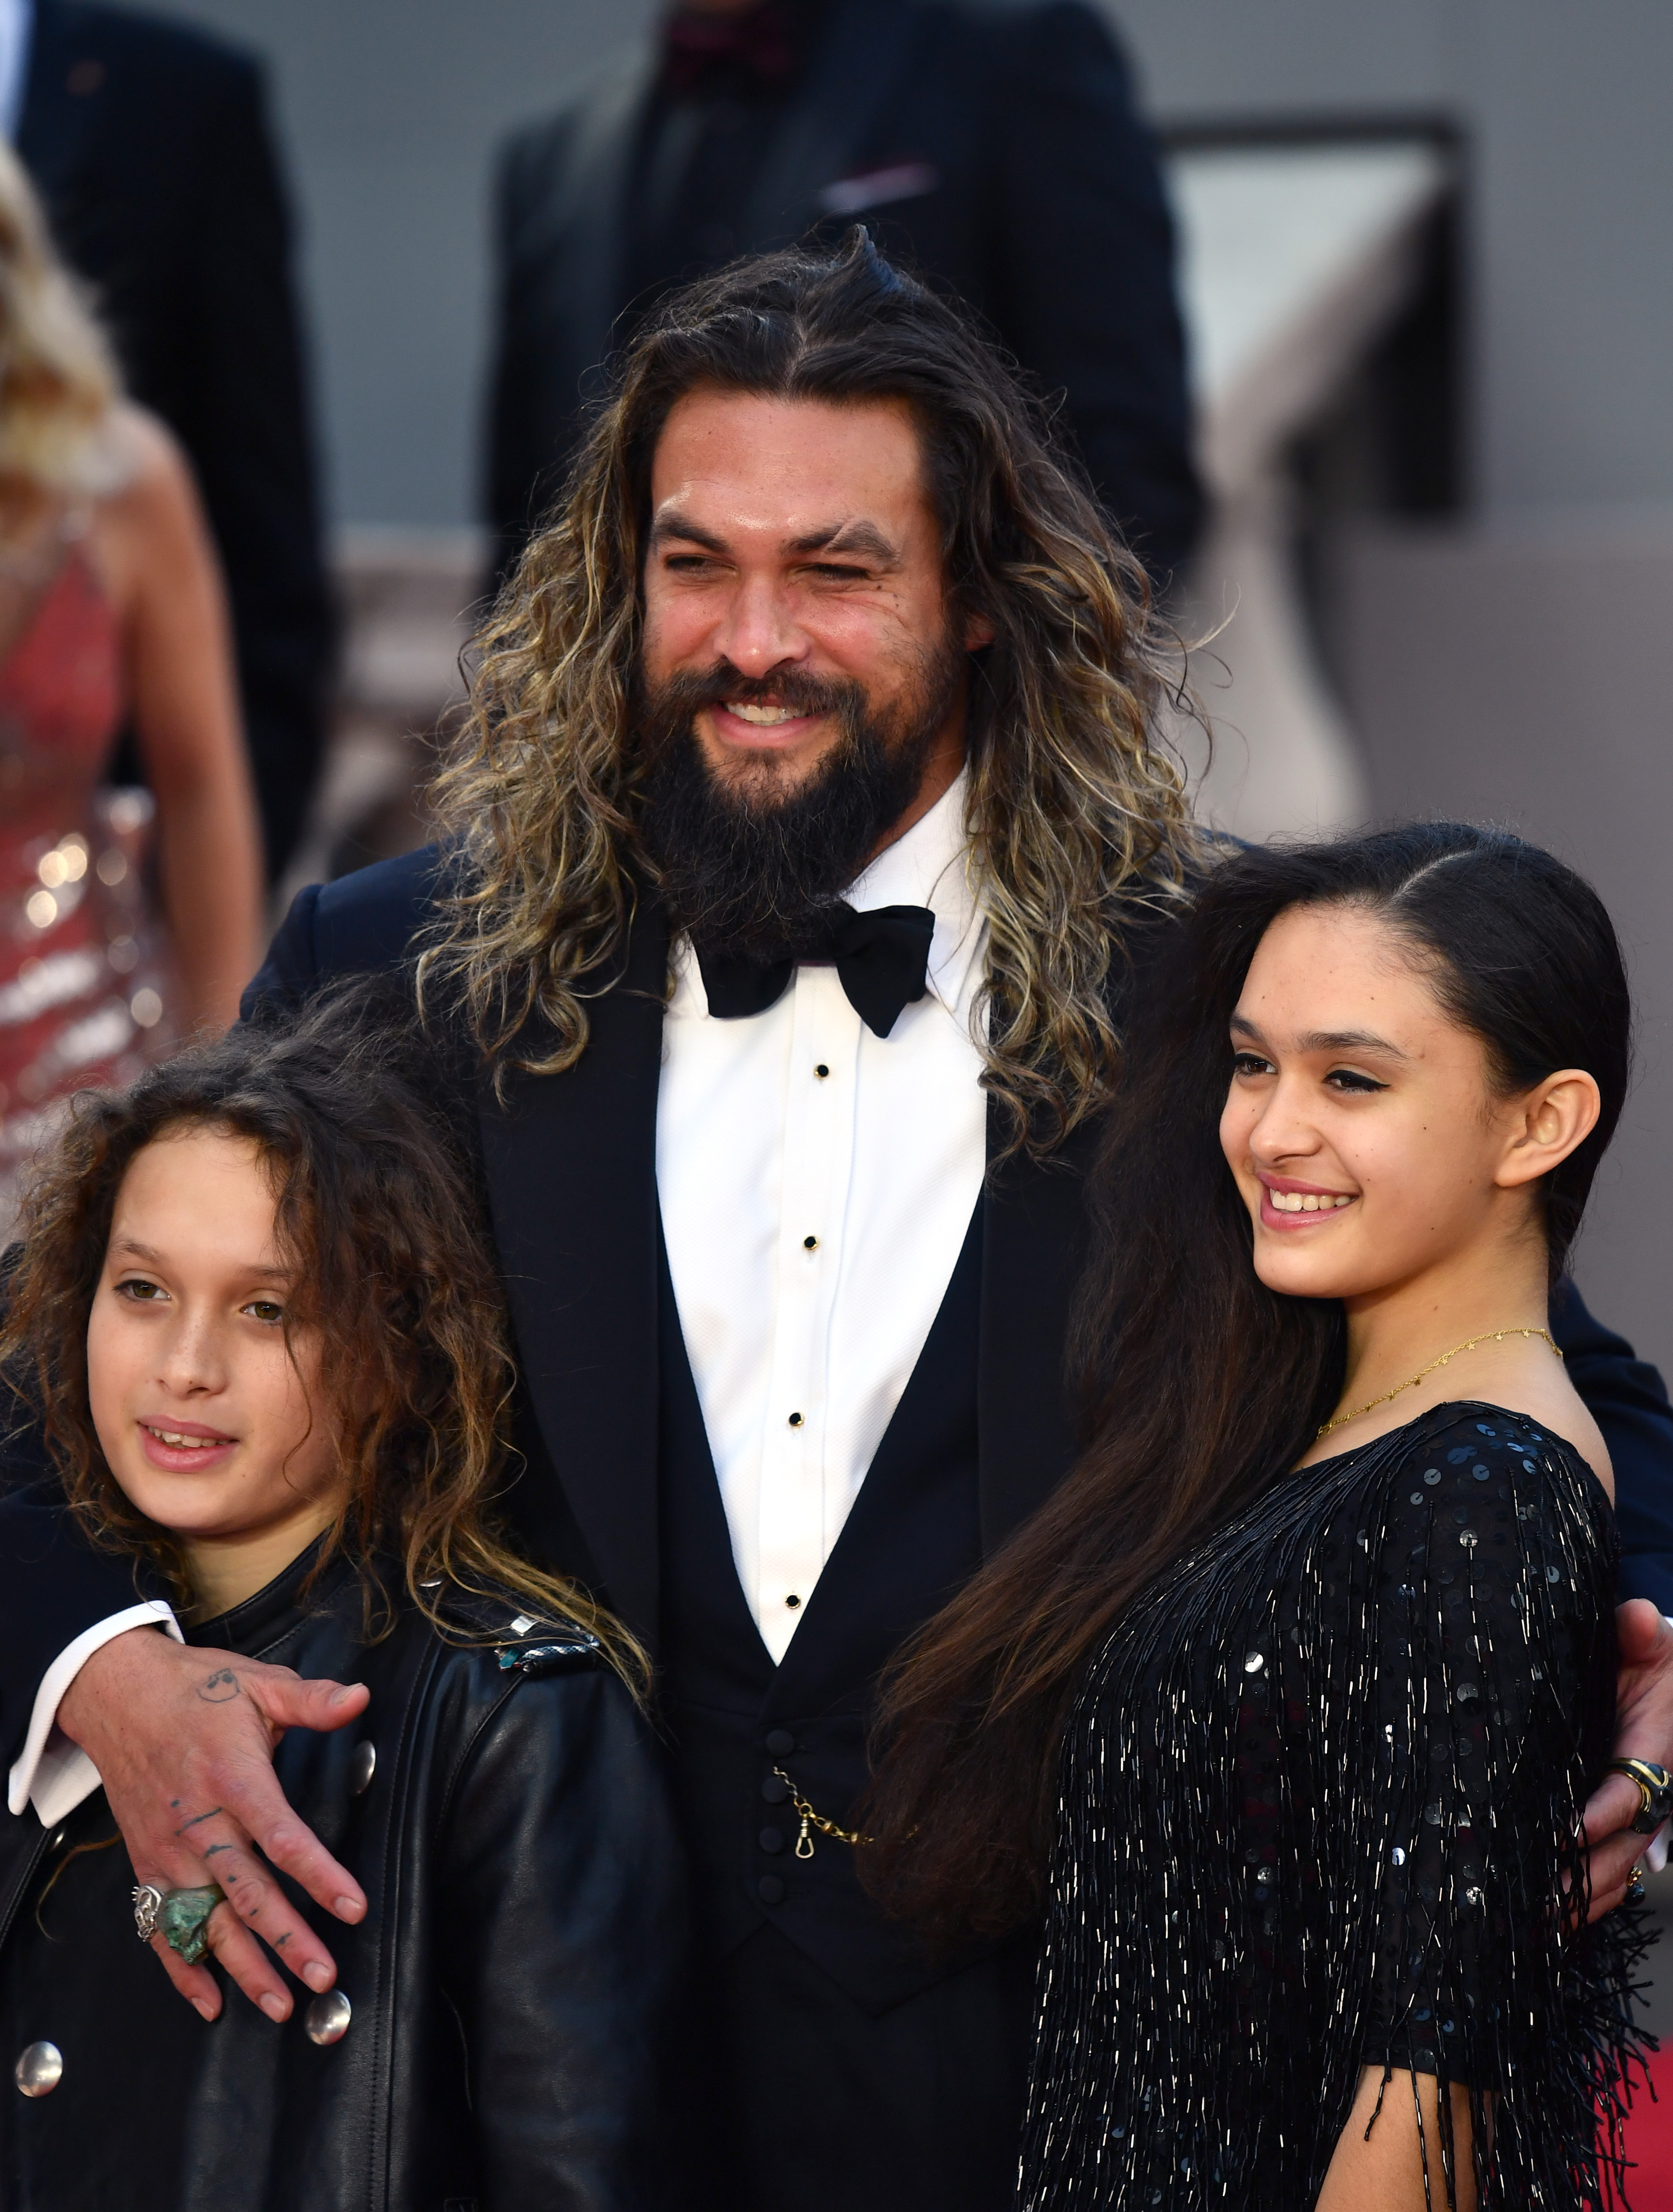 Jason Momoa with his children, Nakoa-Wolf and Lola Momoa, attend the "No Time To Die" premiere on September 28, 2021 in London, England | Source: Getty Images